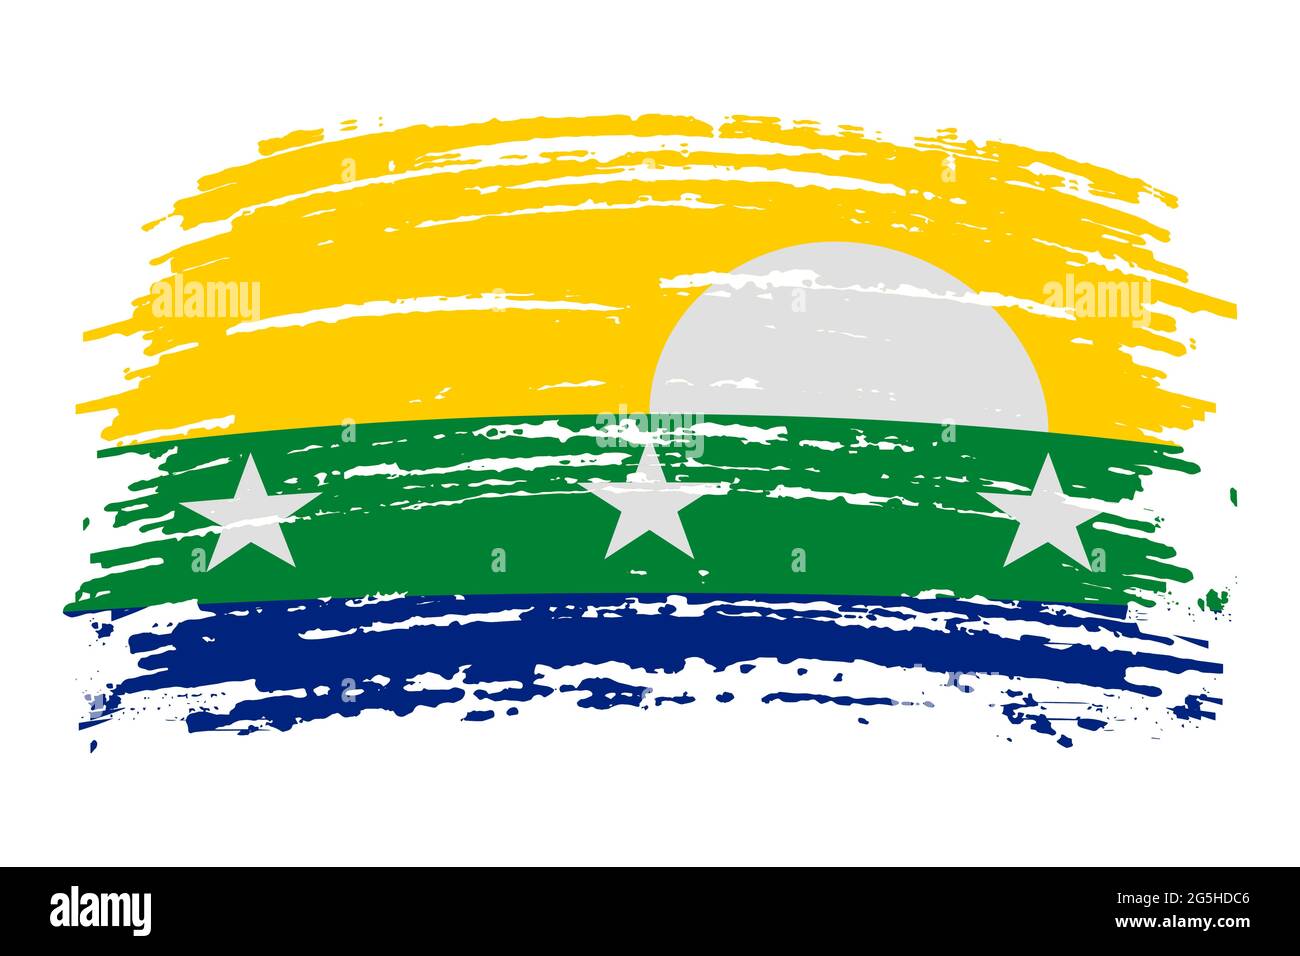 Nueva Esparta Island flag in real proportions and colors, vector image Stock Vector